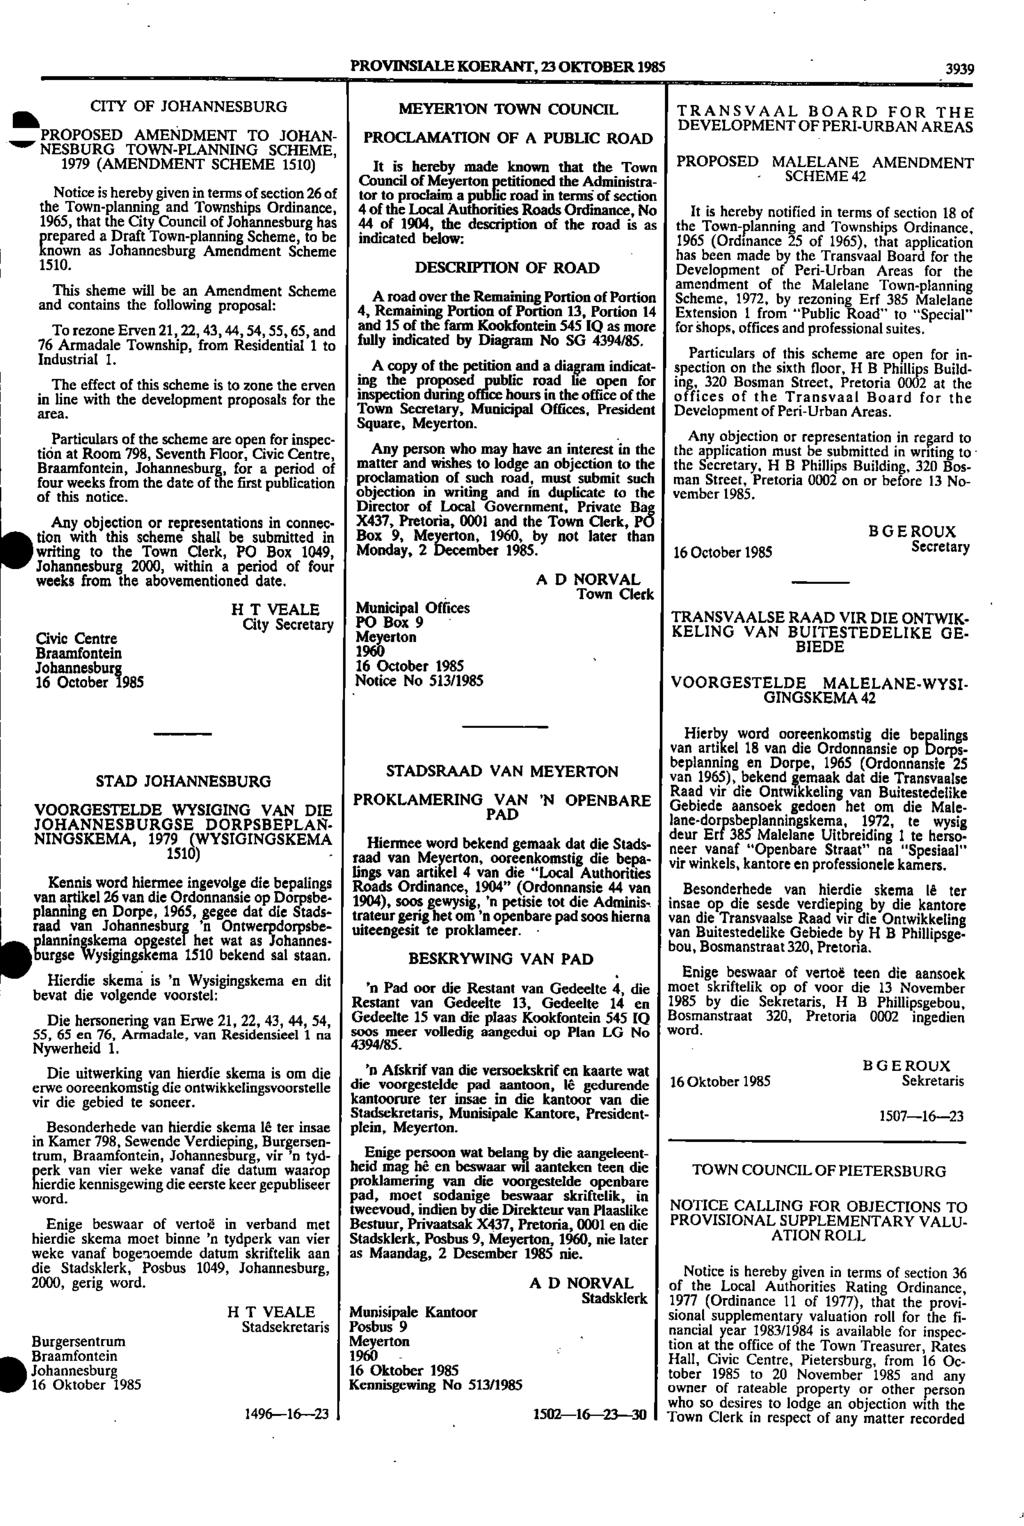 PROVINSIALE KOERANT, 23 OKTOBER 1985 3939 CITY OF JOHANNESBURG MEYERTON TOWN COUNCIL TRANSVAAL BOARD FOR THE It DEVELOPMENT OF PROPOSED PERIURBAN AREAS AMENDMENT TO JOHAN PROCLAMATION OF A PUBLIC